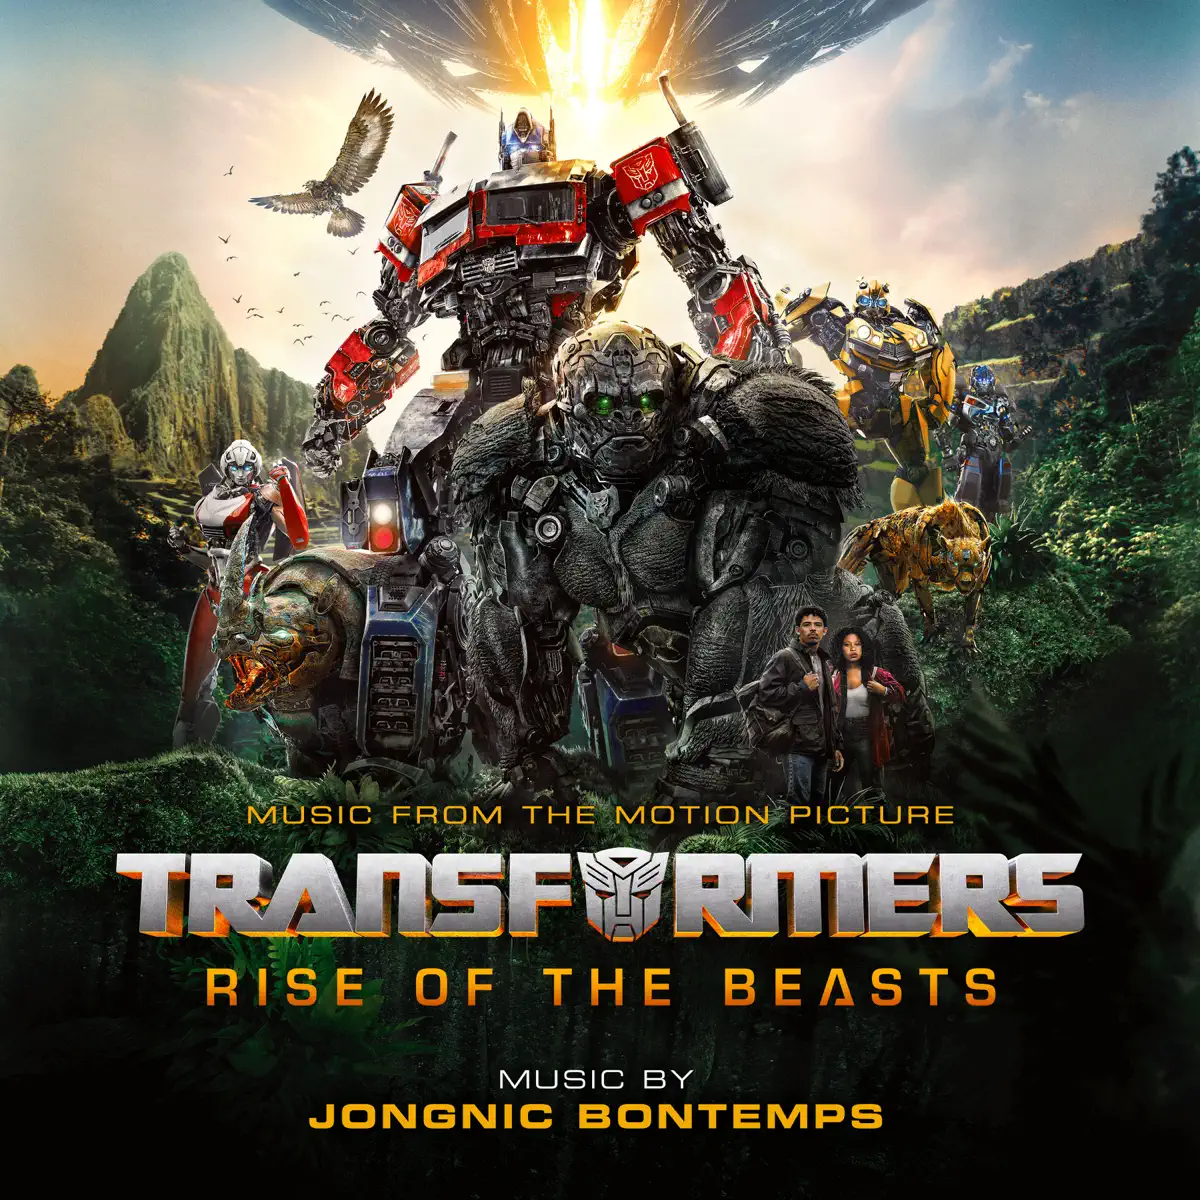 Jongnic Bontemps - 变形金刚: 超能勇士崛起 Transformers: Rise of the Beasts (Music from the Motion Picture) - Pre-Single (2023) [iTunes Plus AAC M4A]-新房子